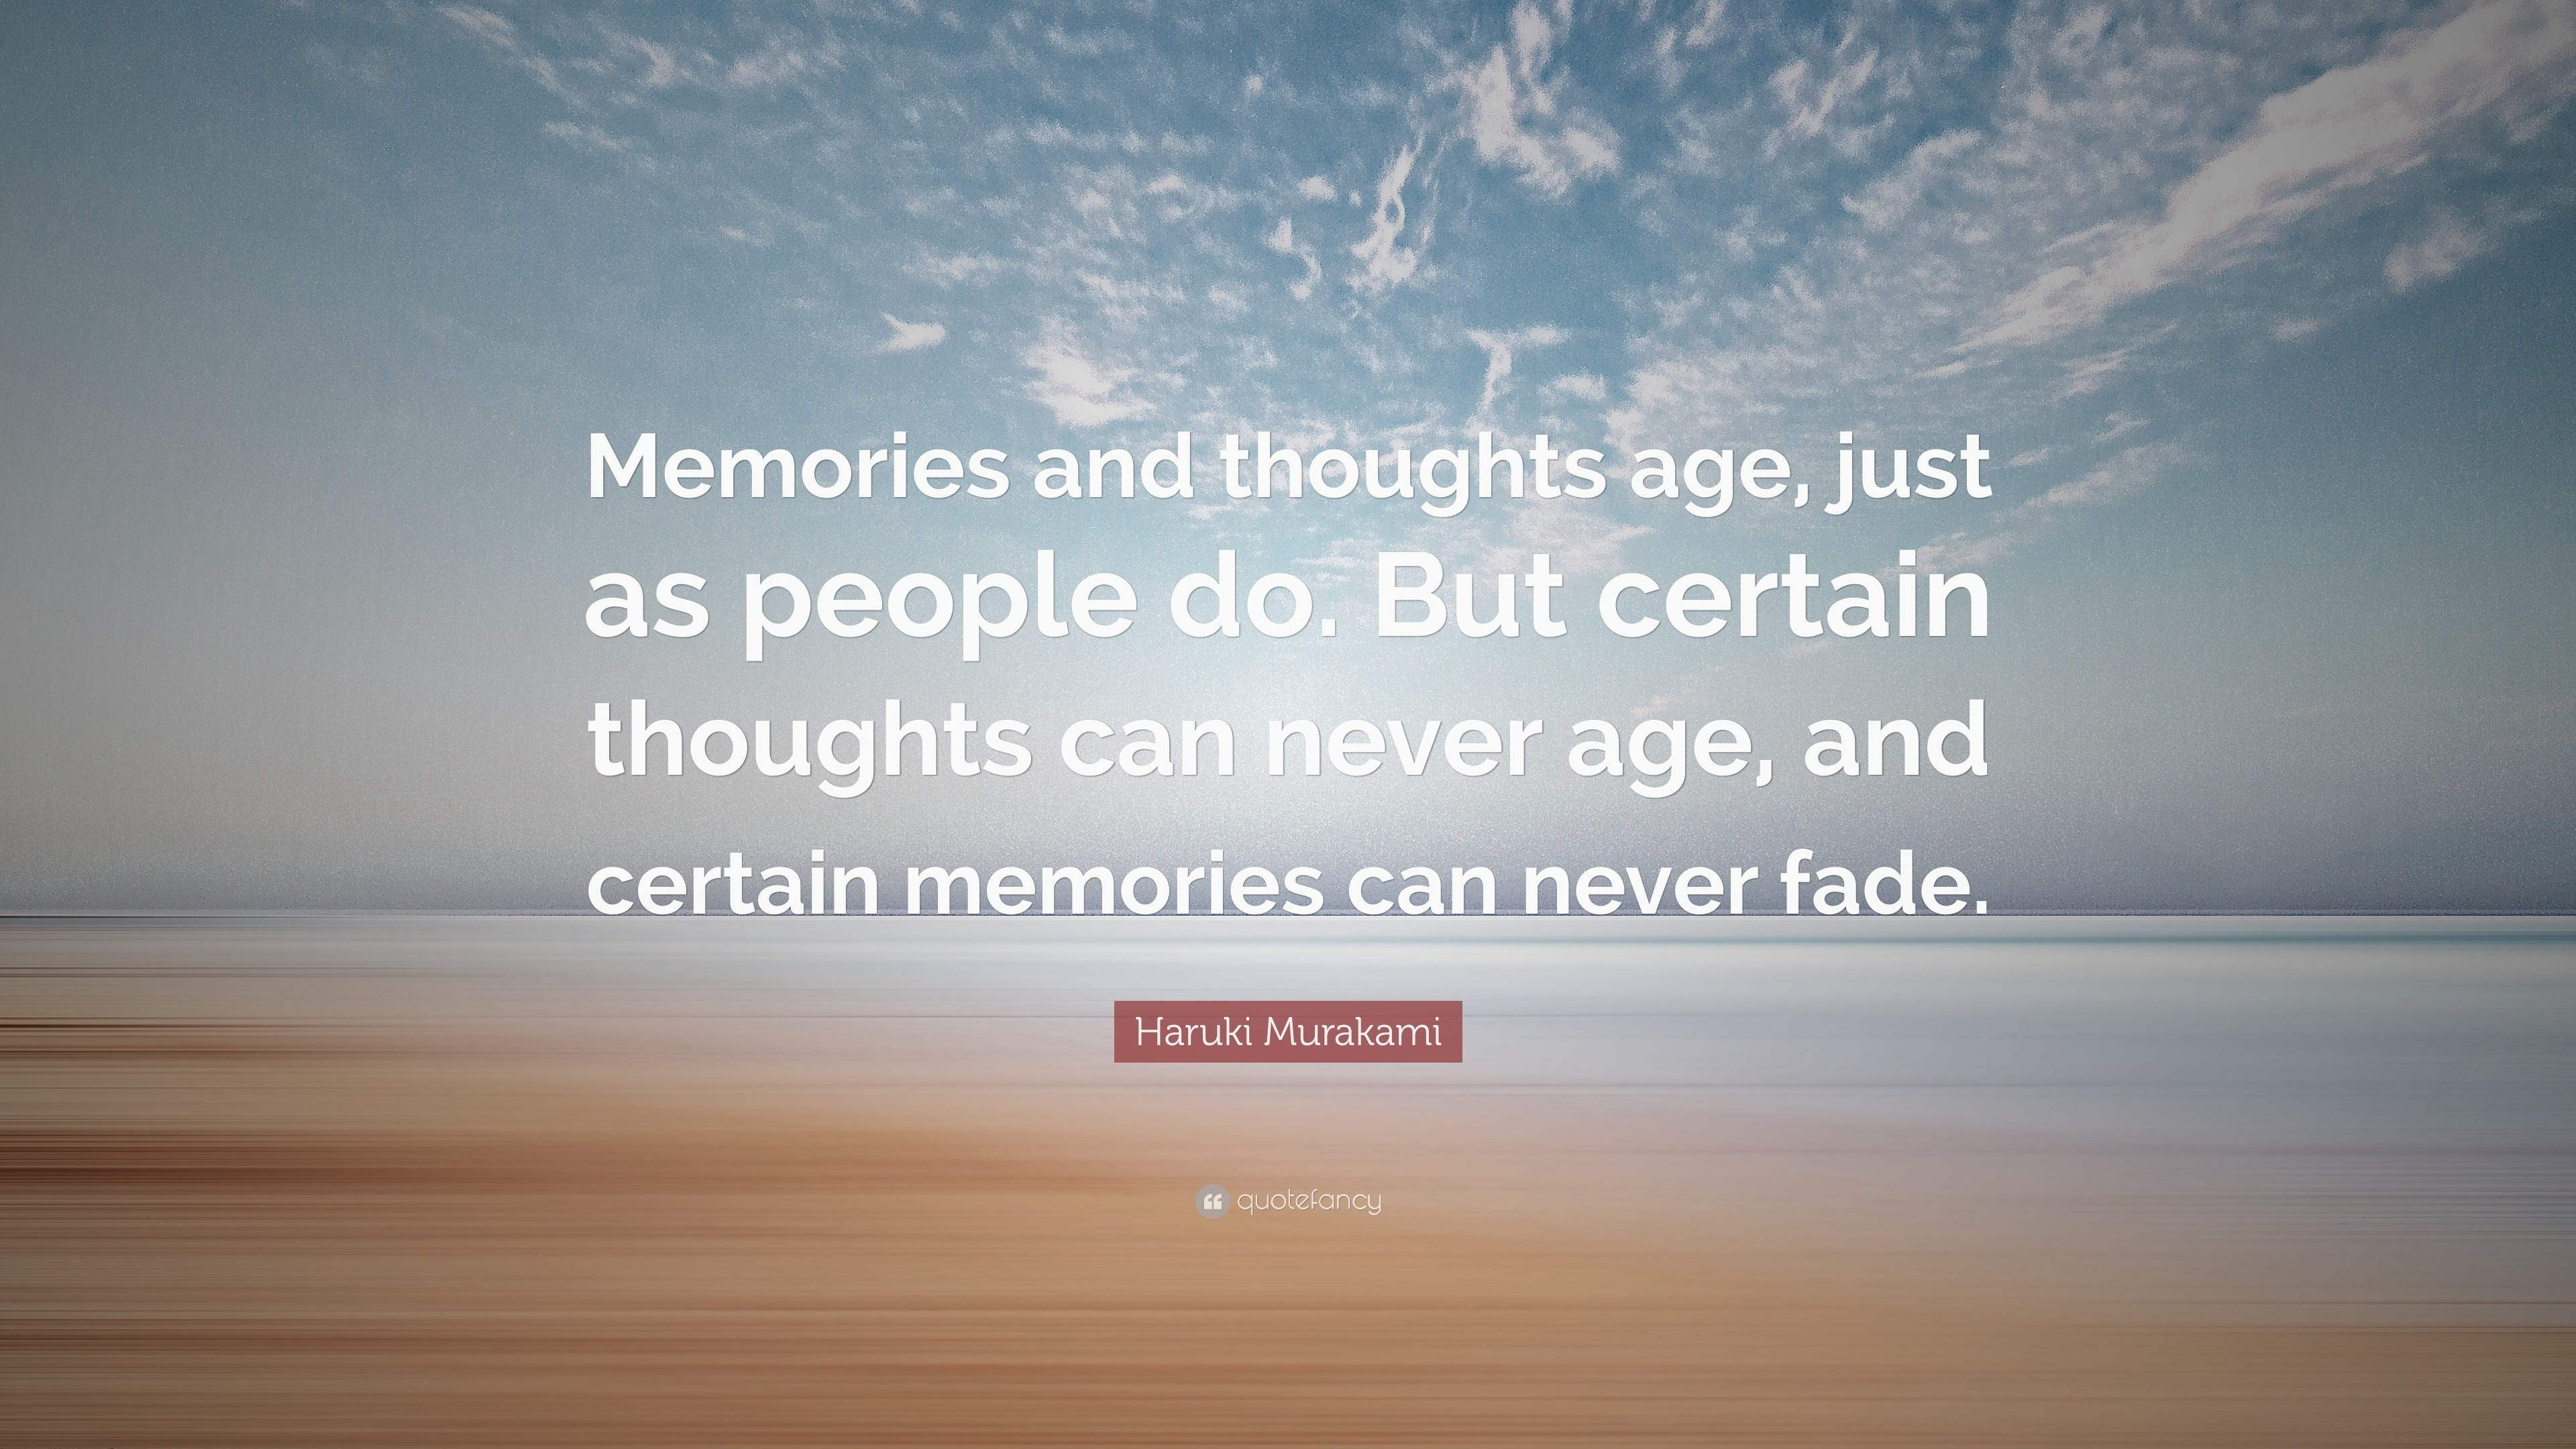 Haruki Murakami Quote: “Memories and thoughts age, just as people do ...